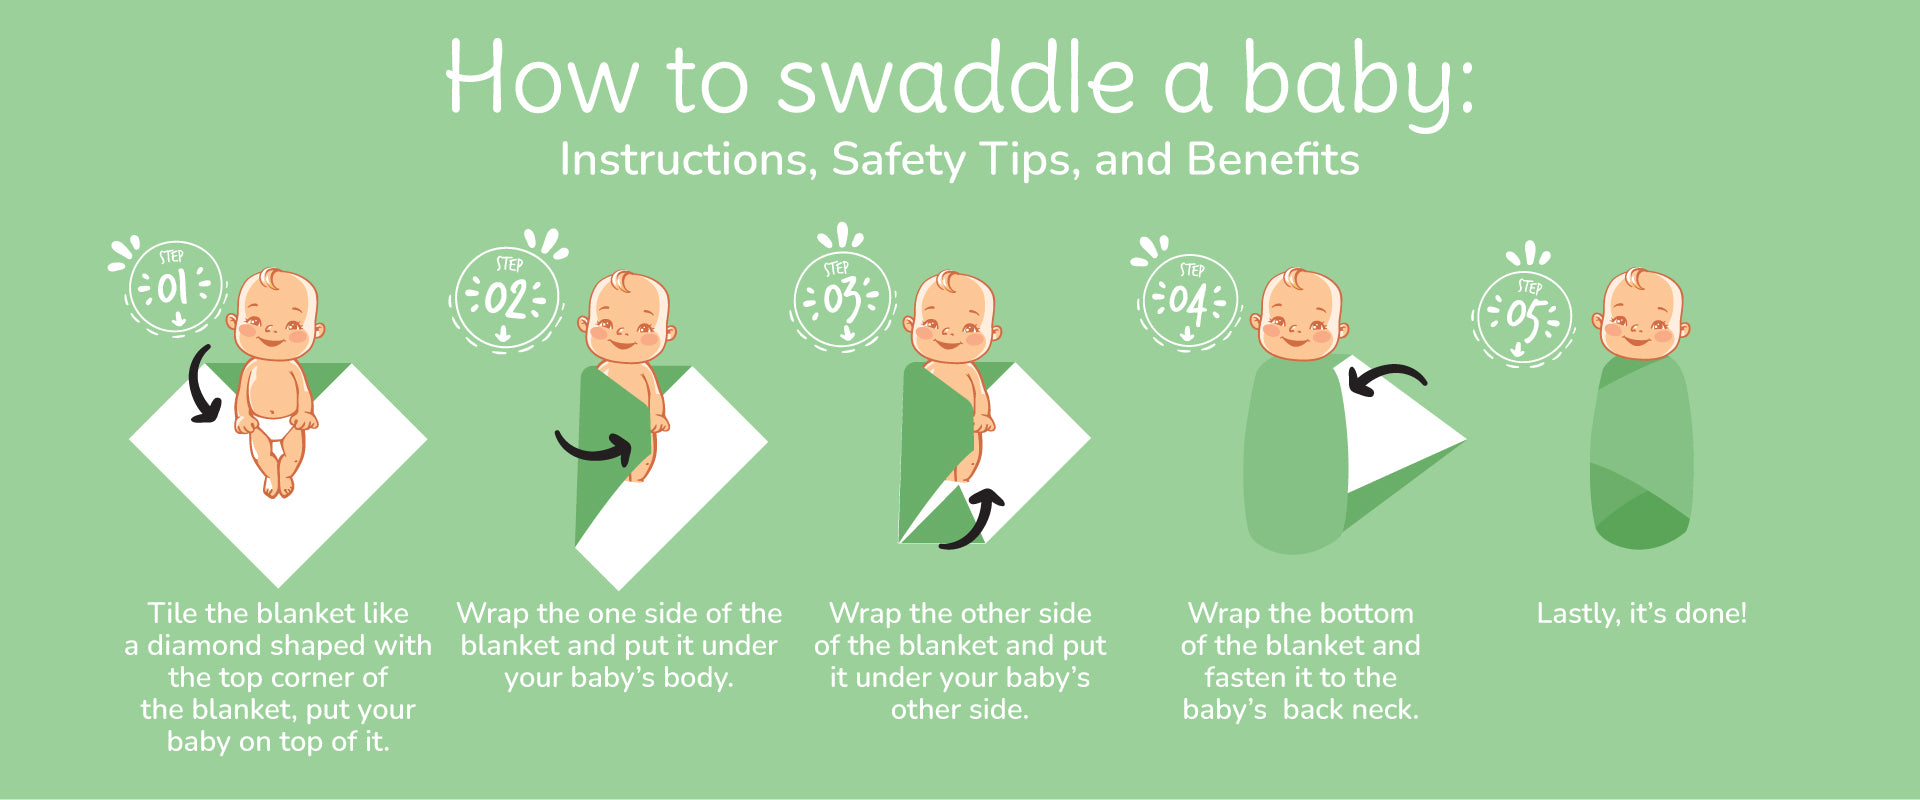 How to Swaddle a Baby: Instructions, Safety Tips, and Benefits